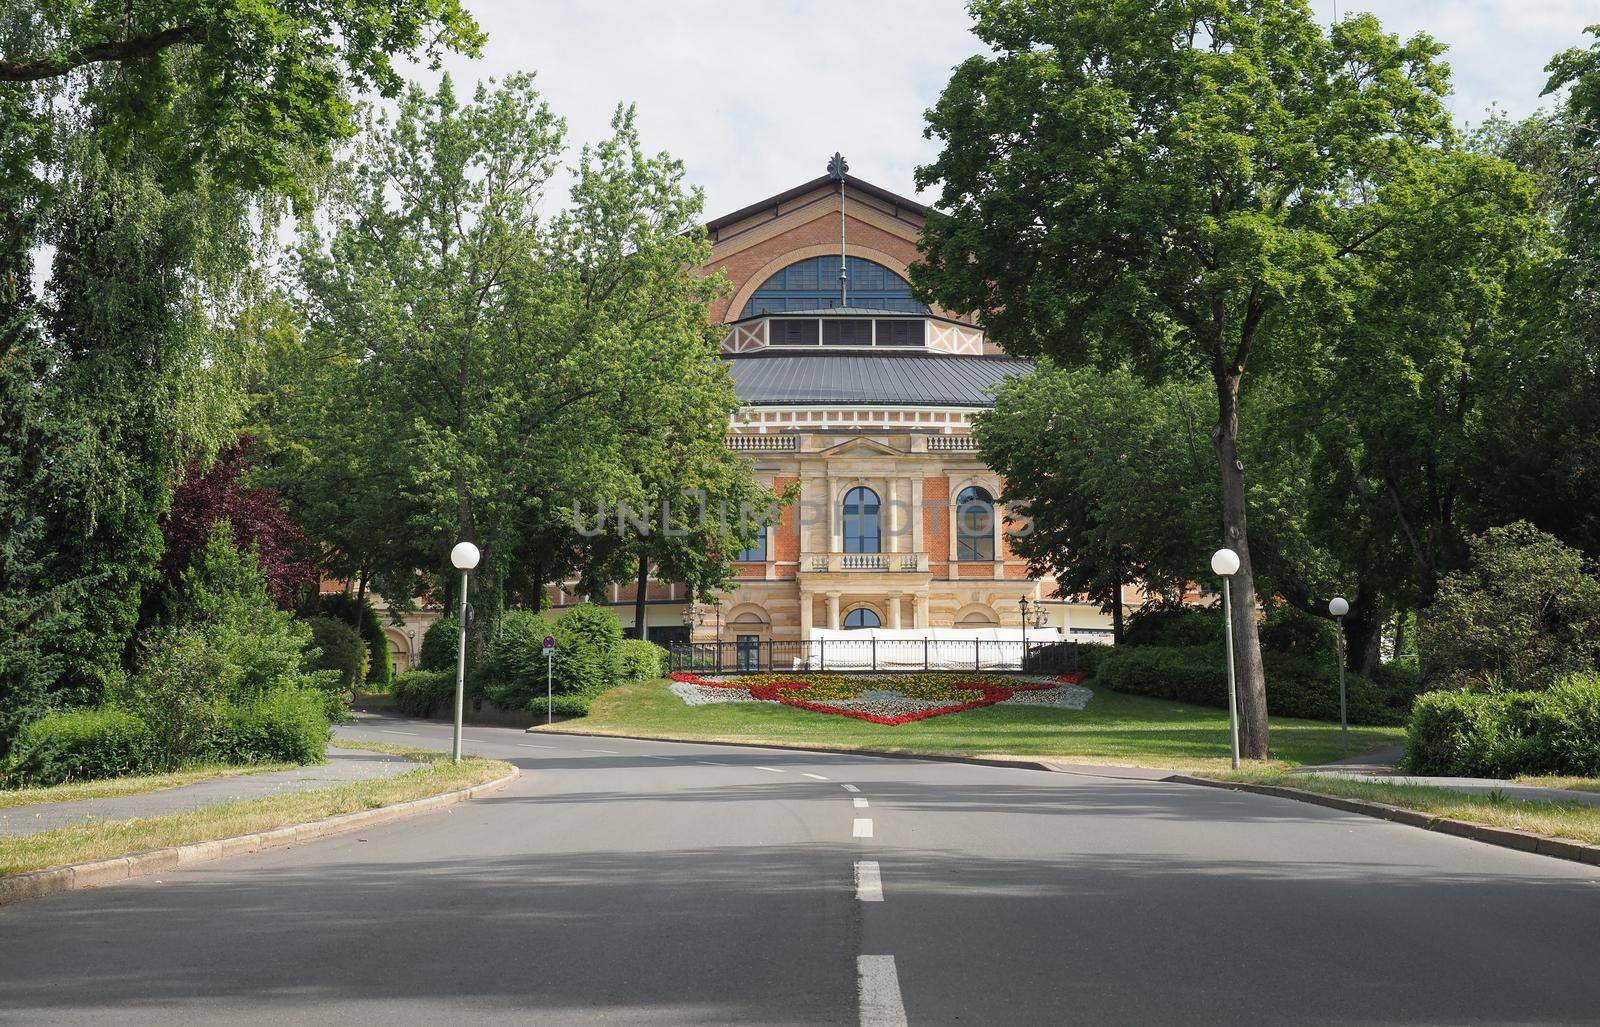 Wagner Festspielhaus translation Festival Theatre in Bayreuth, Germany